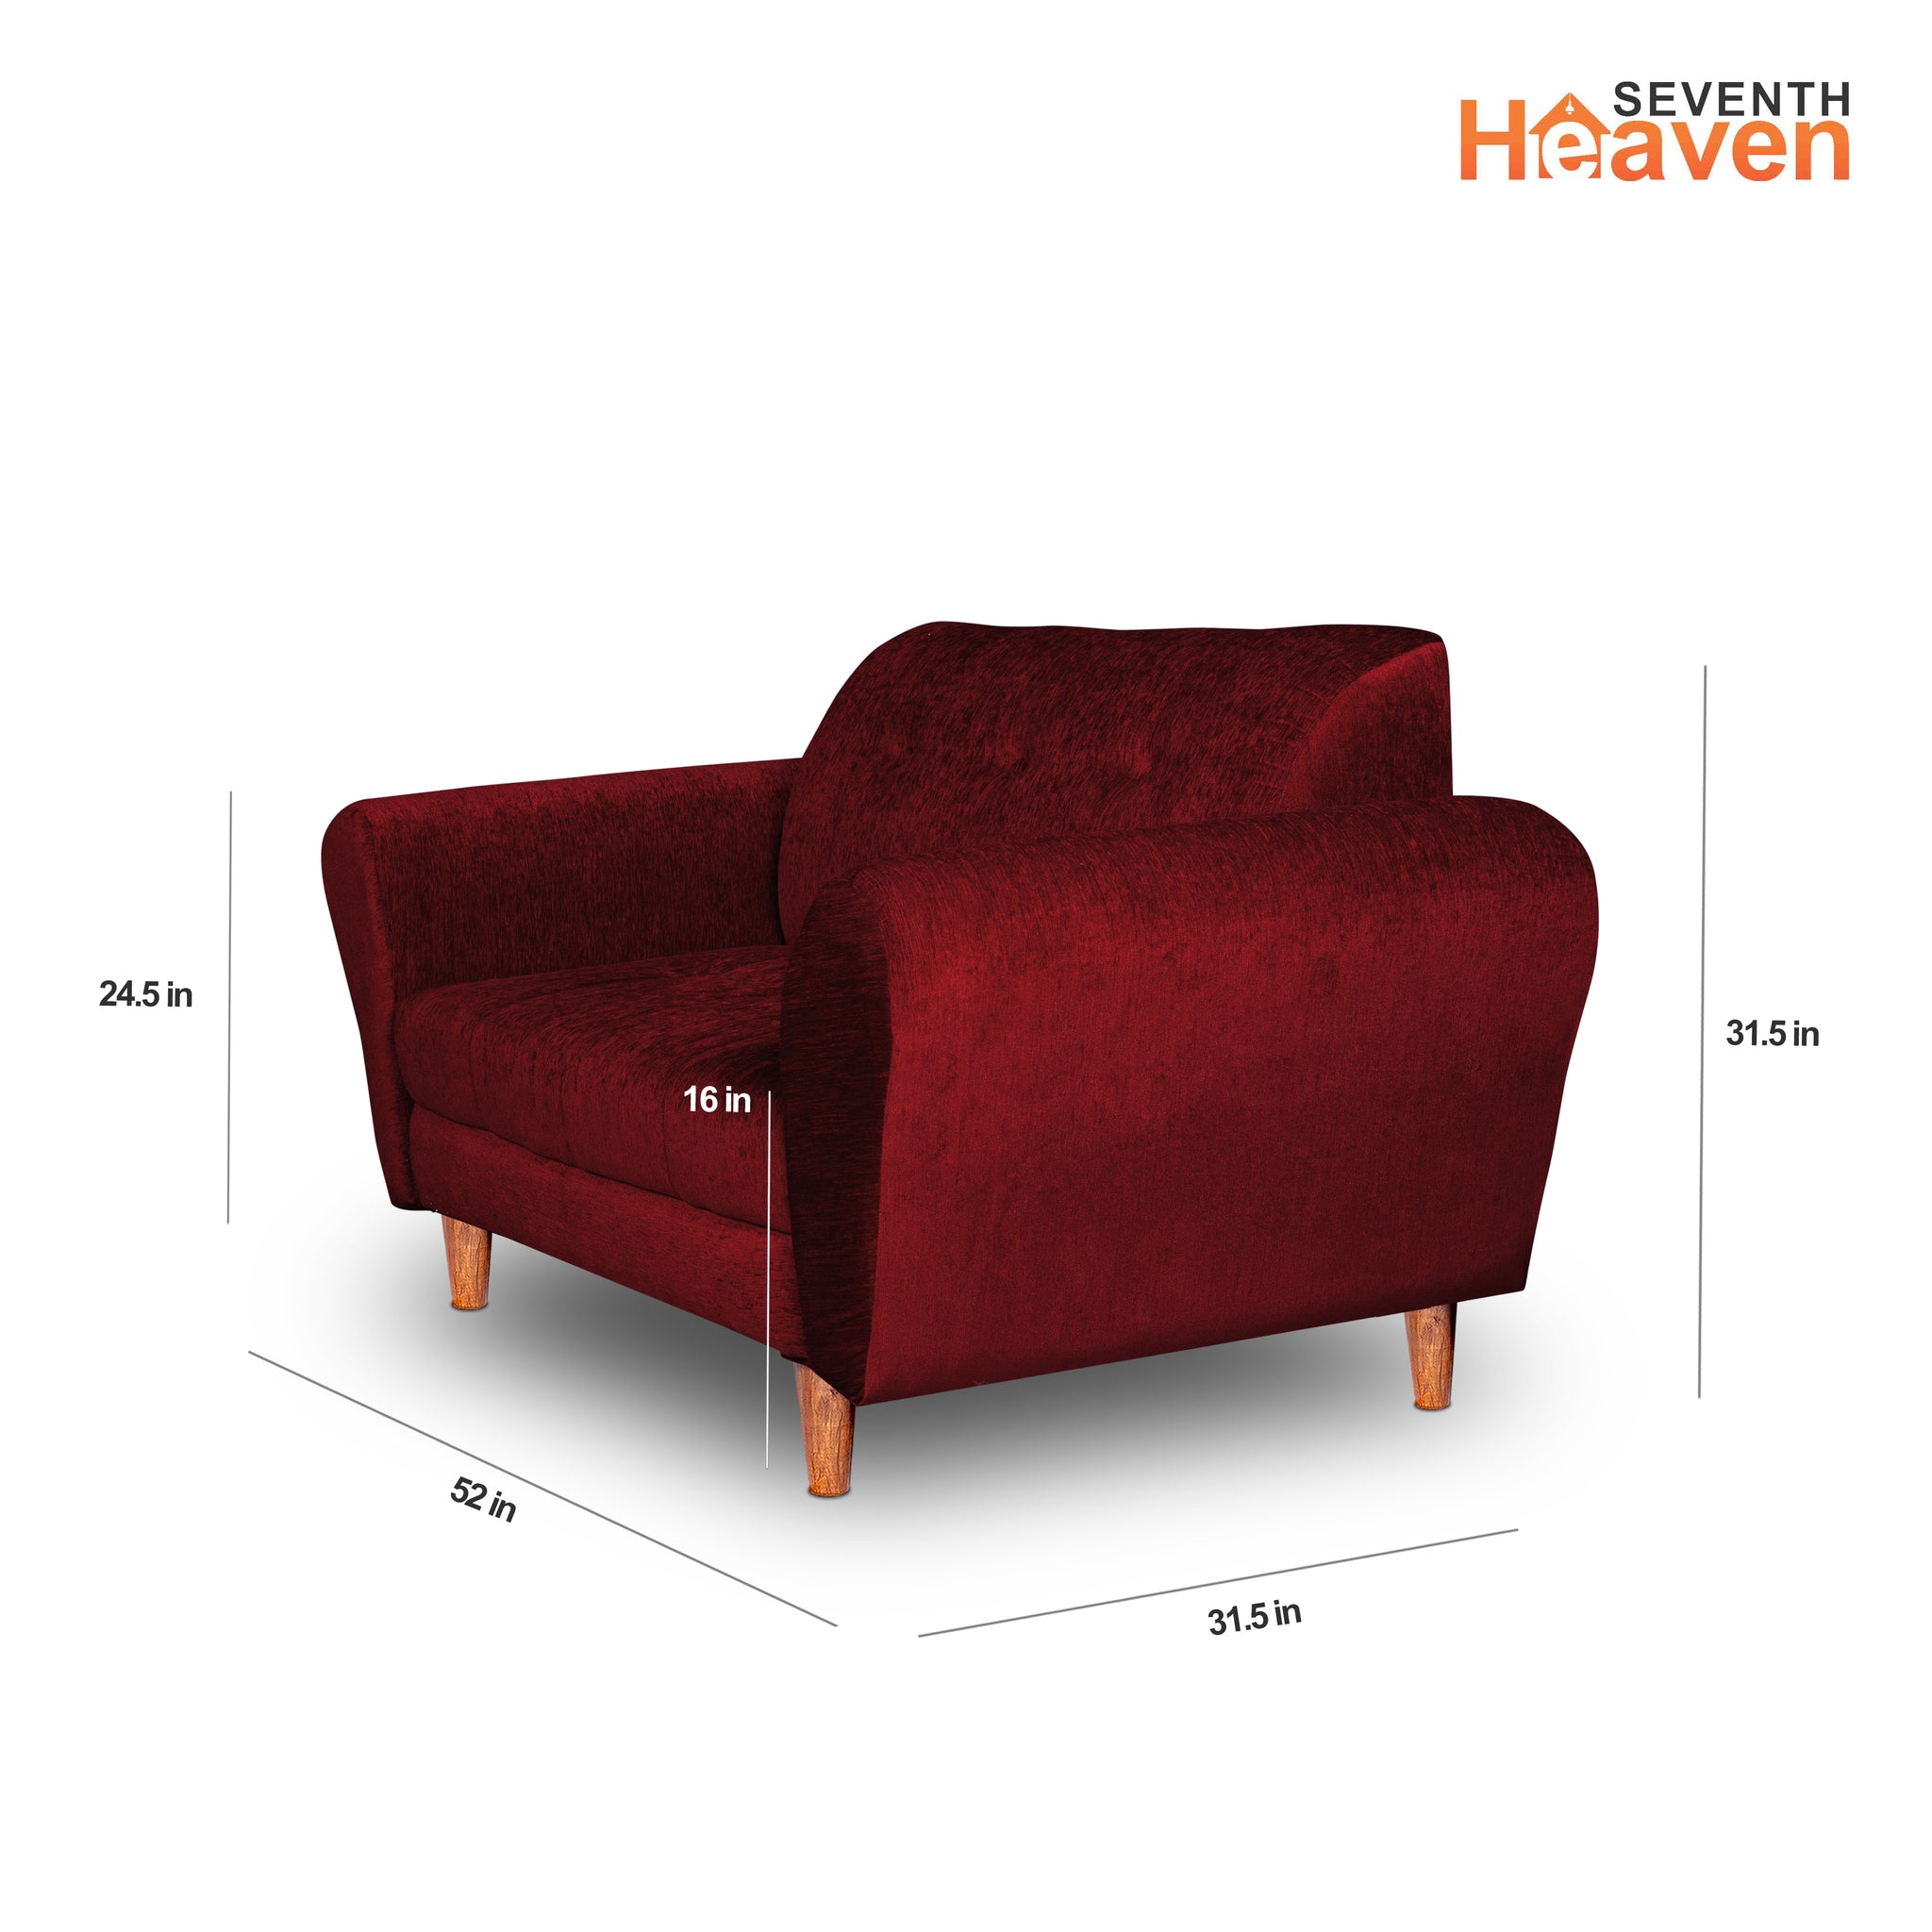 Seventh Heaven Milan 2 Seater Wooden Sofa Set Modern & Elegant Smart Furniture Range for luxurious homes, living rooms and offices. Maroon Colour Molphino fabric with sheesham polished wooden legs. Product dimensions are also mentioned.